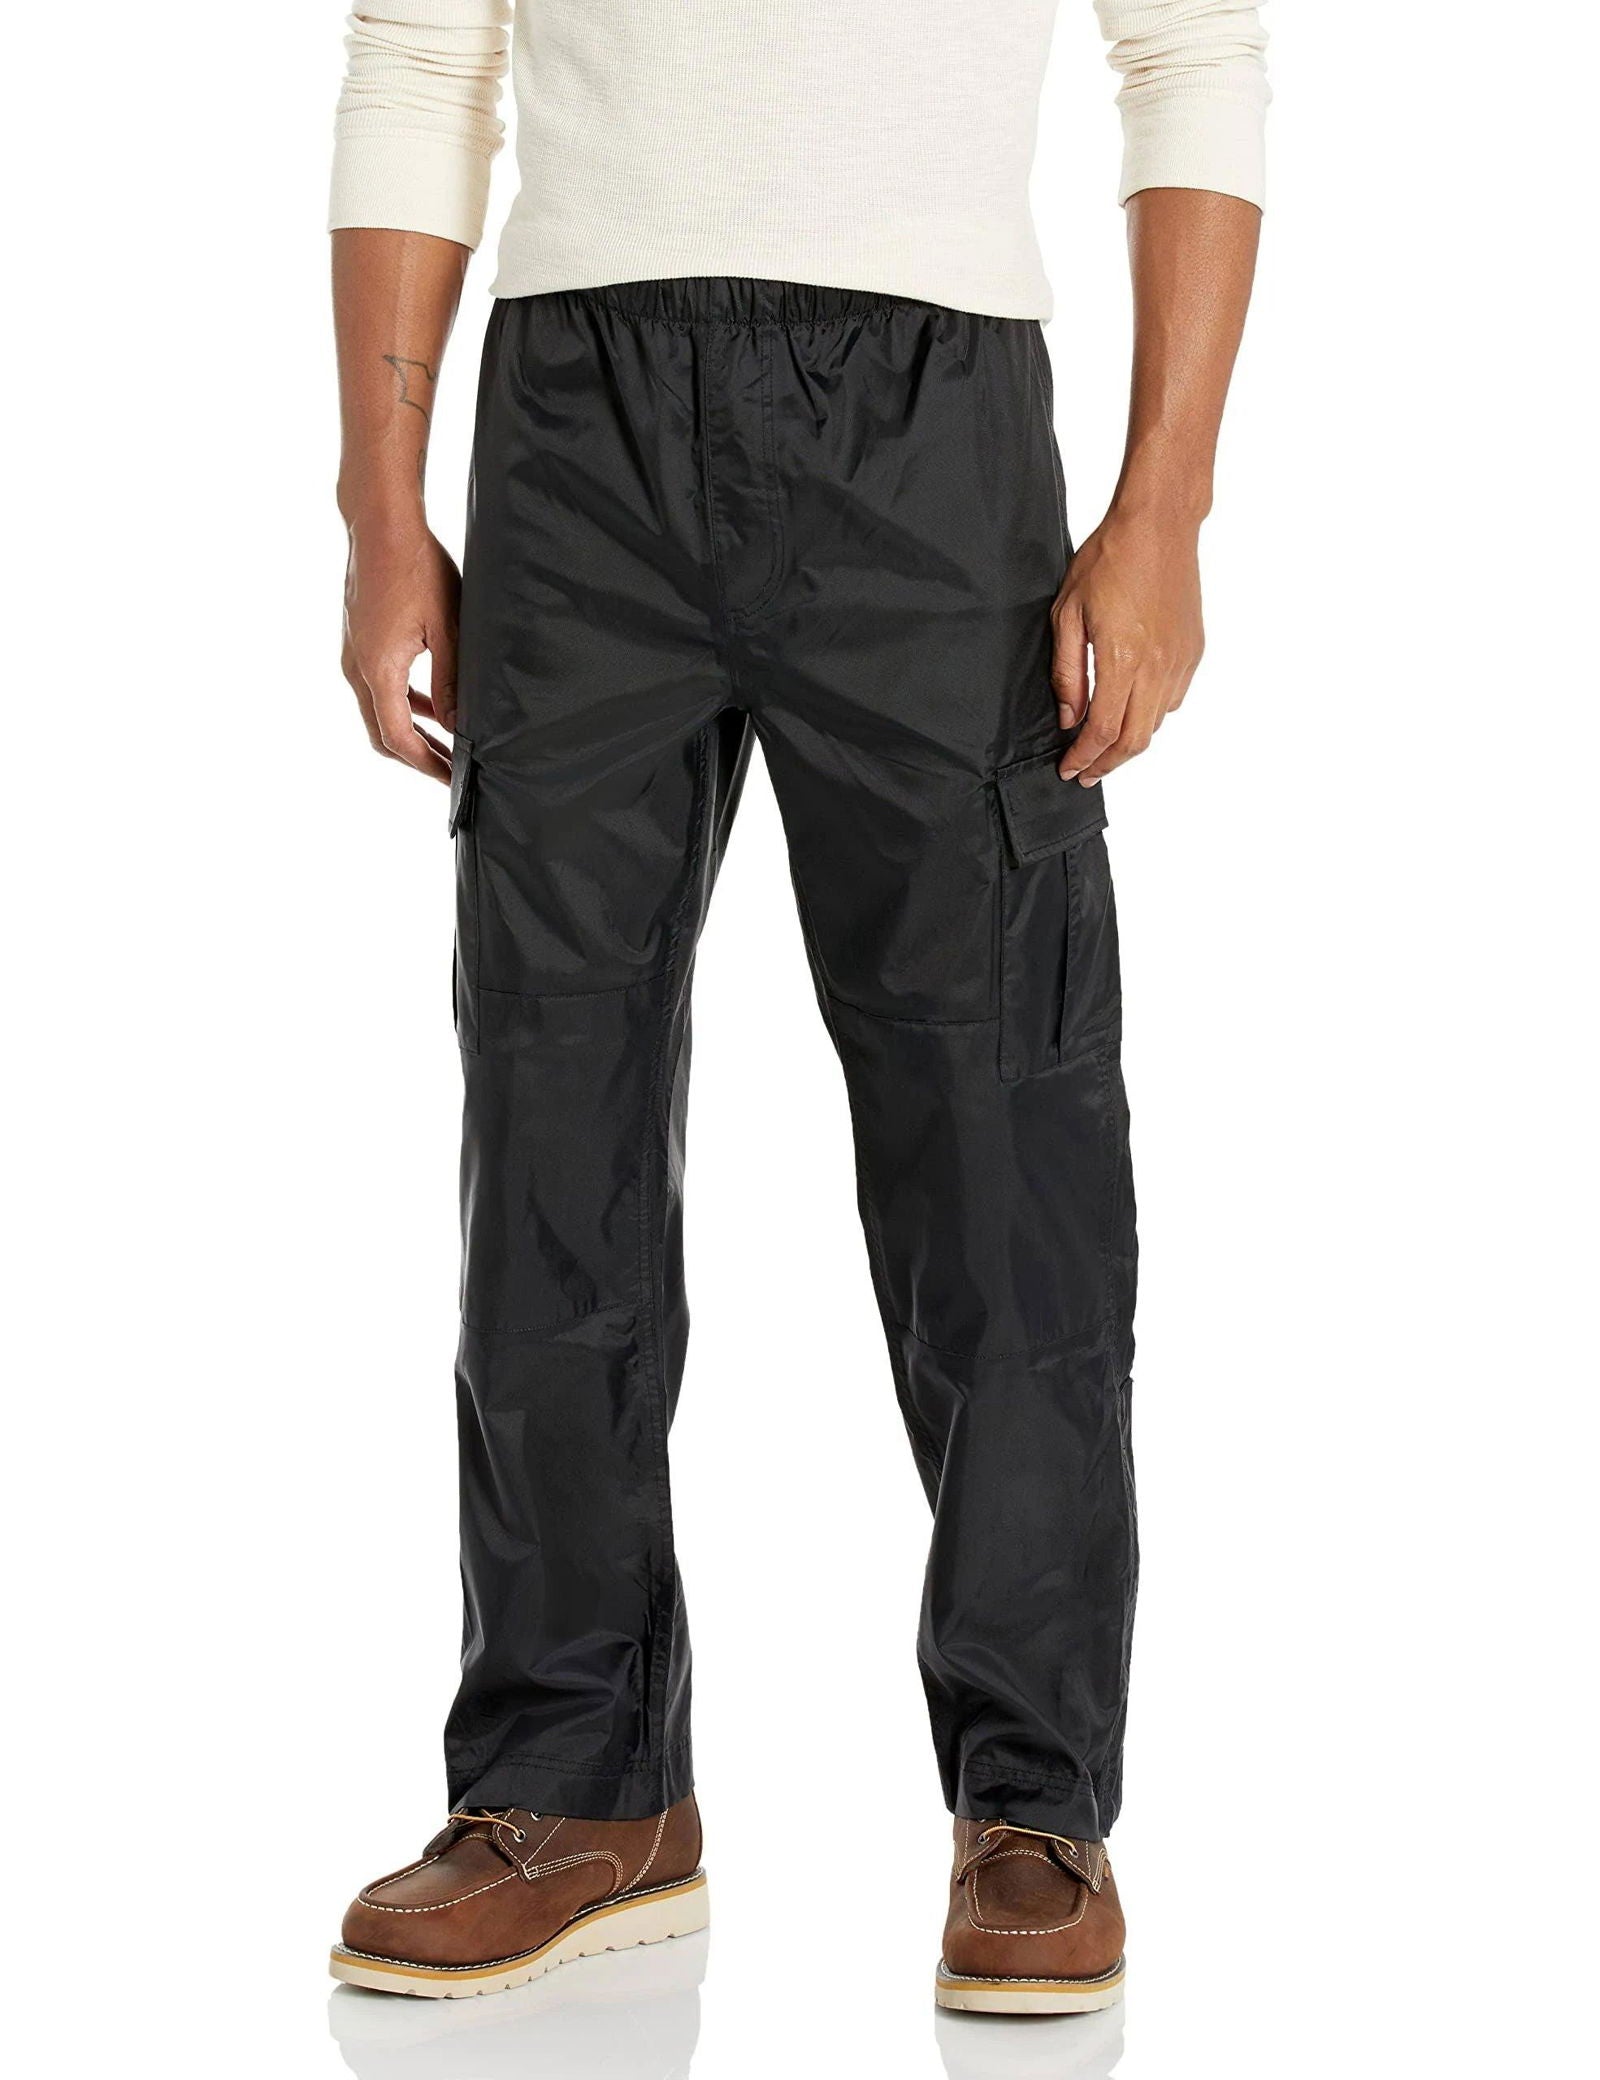 103507 - Dry Harbor Pant - Black - Purpose-Built / Home of the Trades -  - 